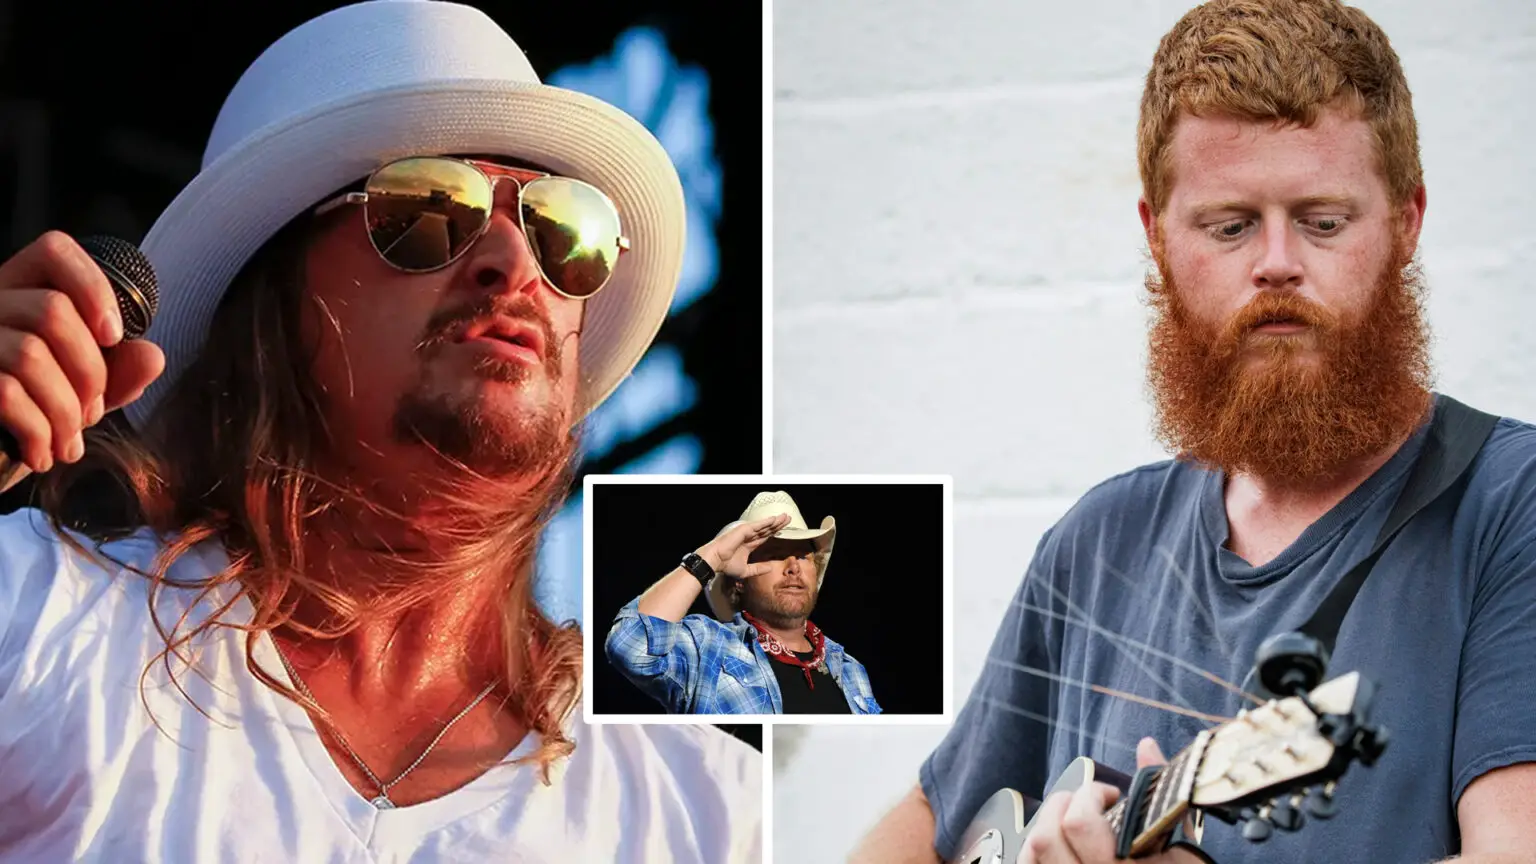 Breaking: Kid Rock and Oliver Anthony To Give a Tribute to Toby Keith at the Next Super Bowl Halftime